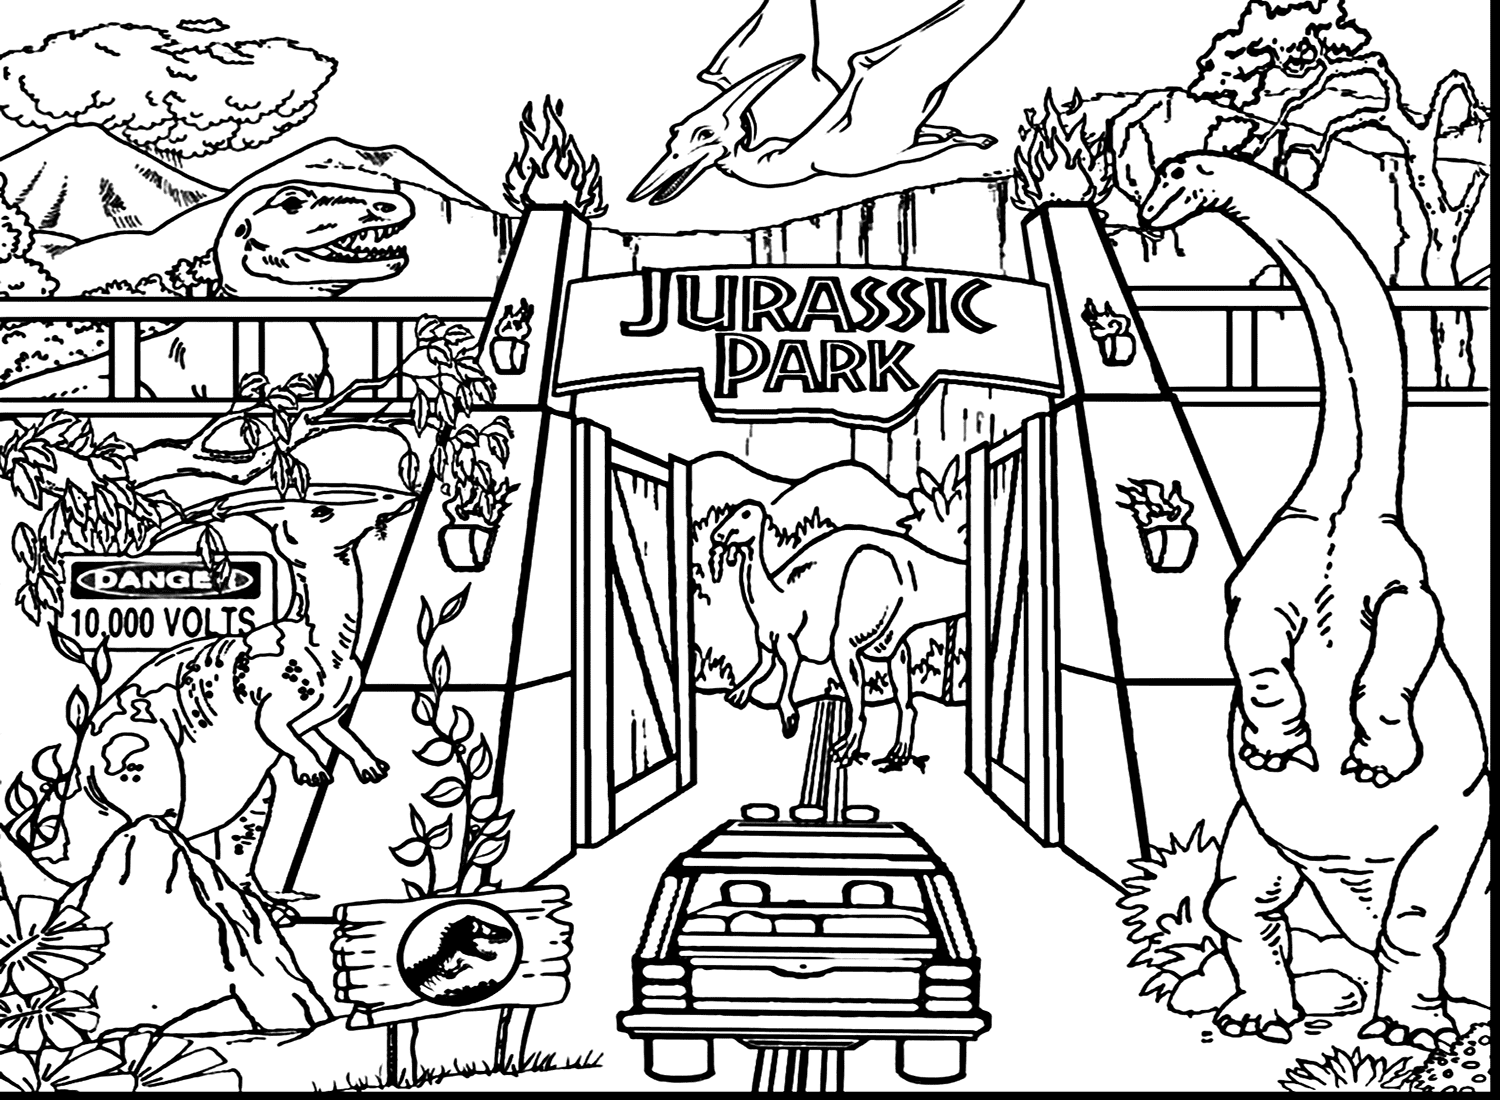 Jurassic World Image To Color from Jurassic World